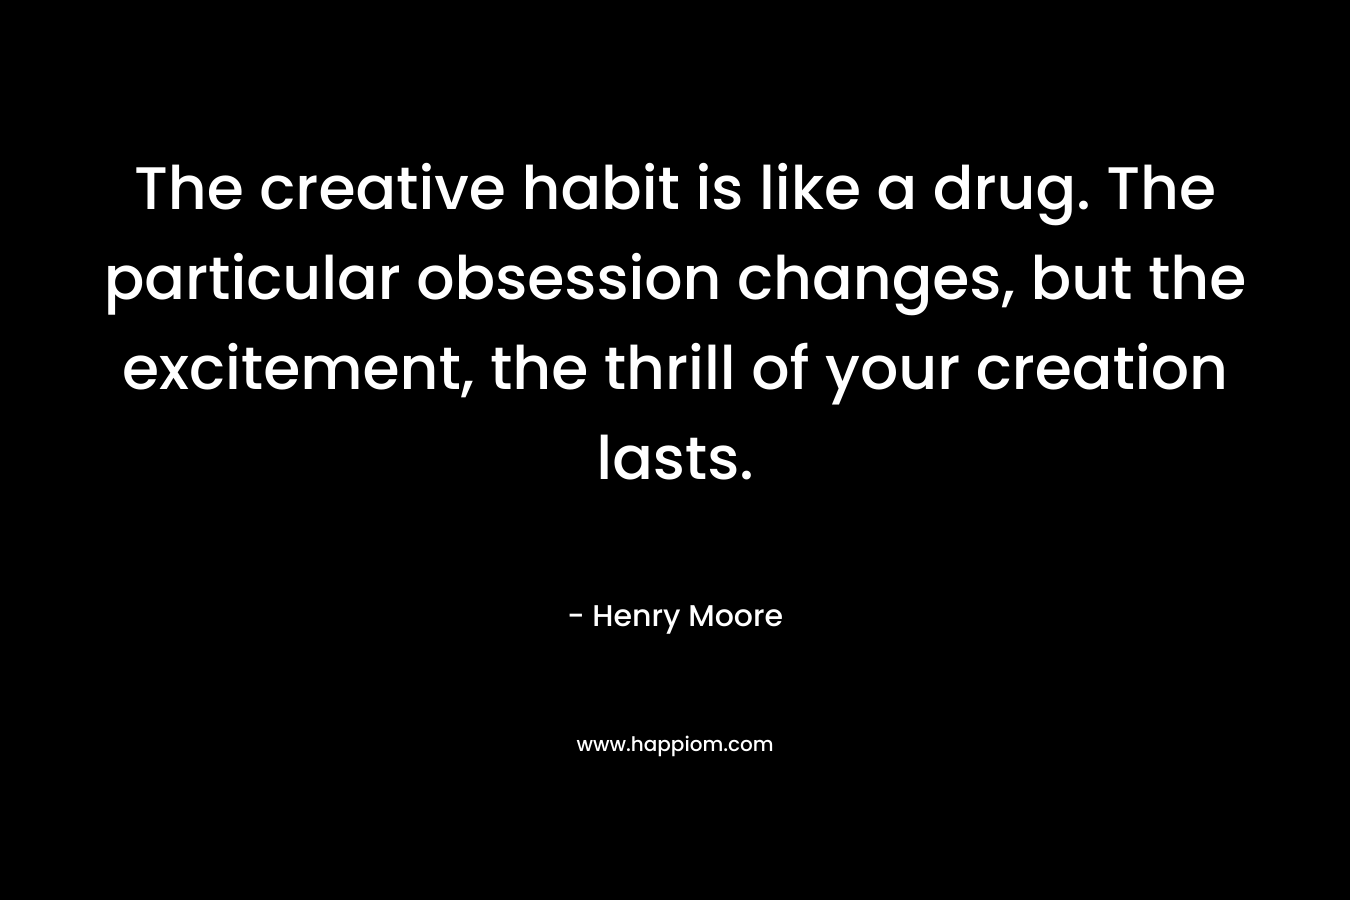 The creative habit is like a drug. The particular obsession changes, but the excitement, the thrill of your creation lasts. – Henry Moore